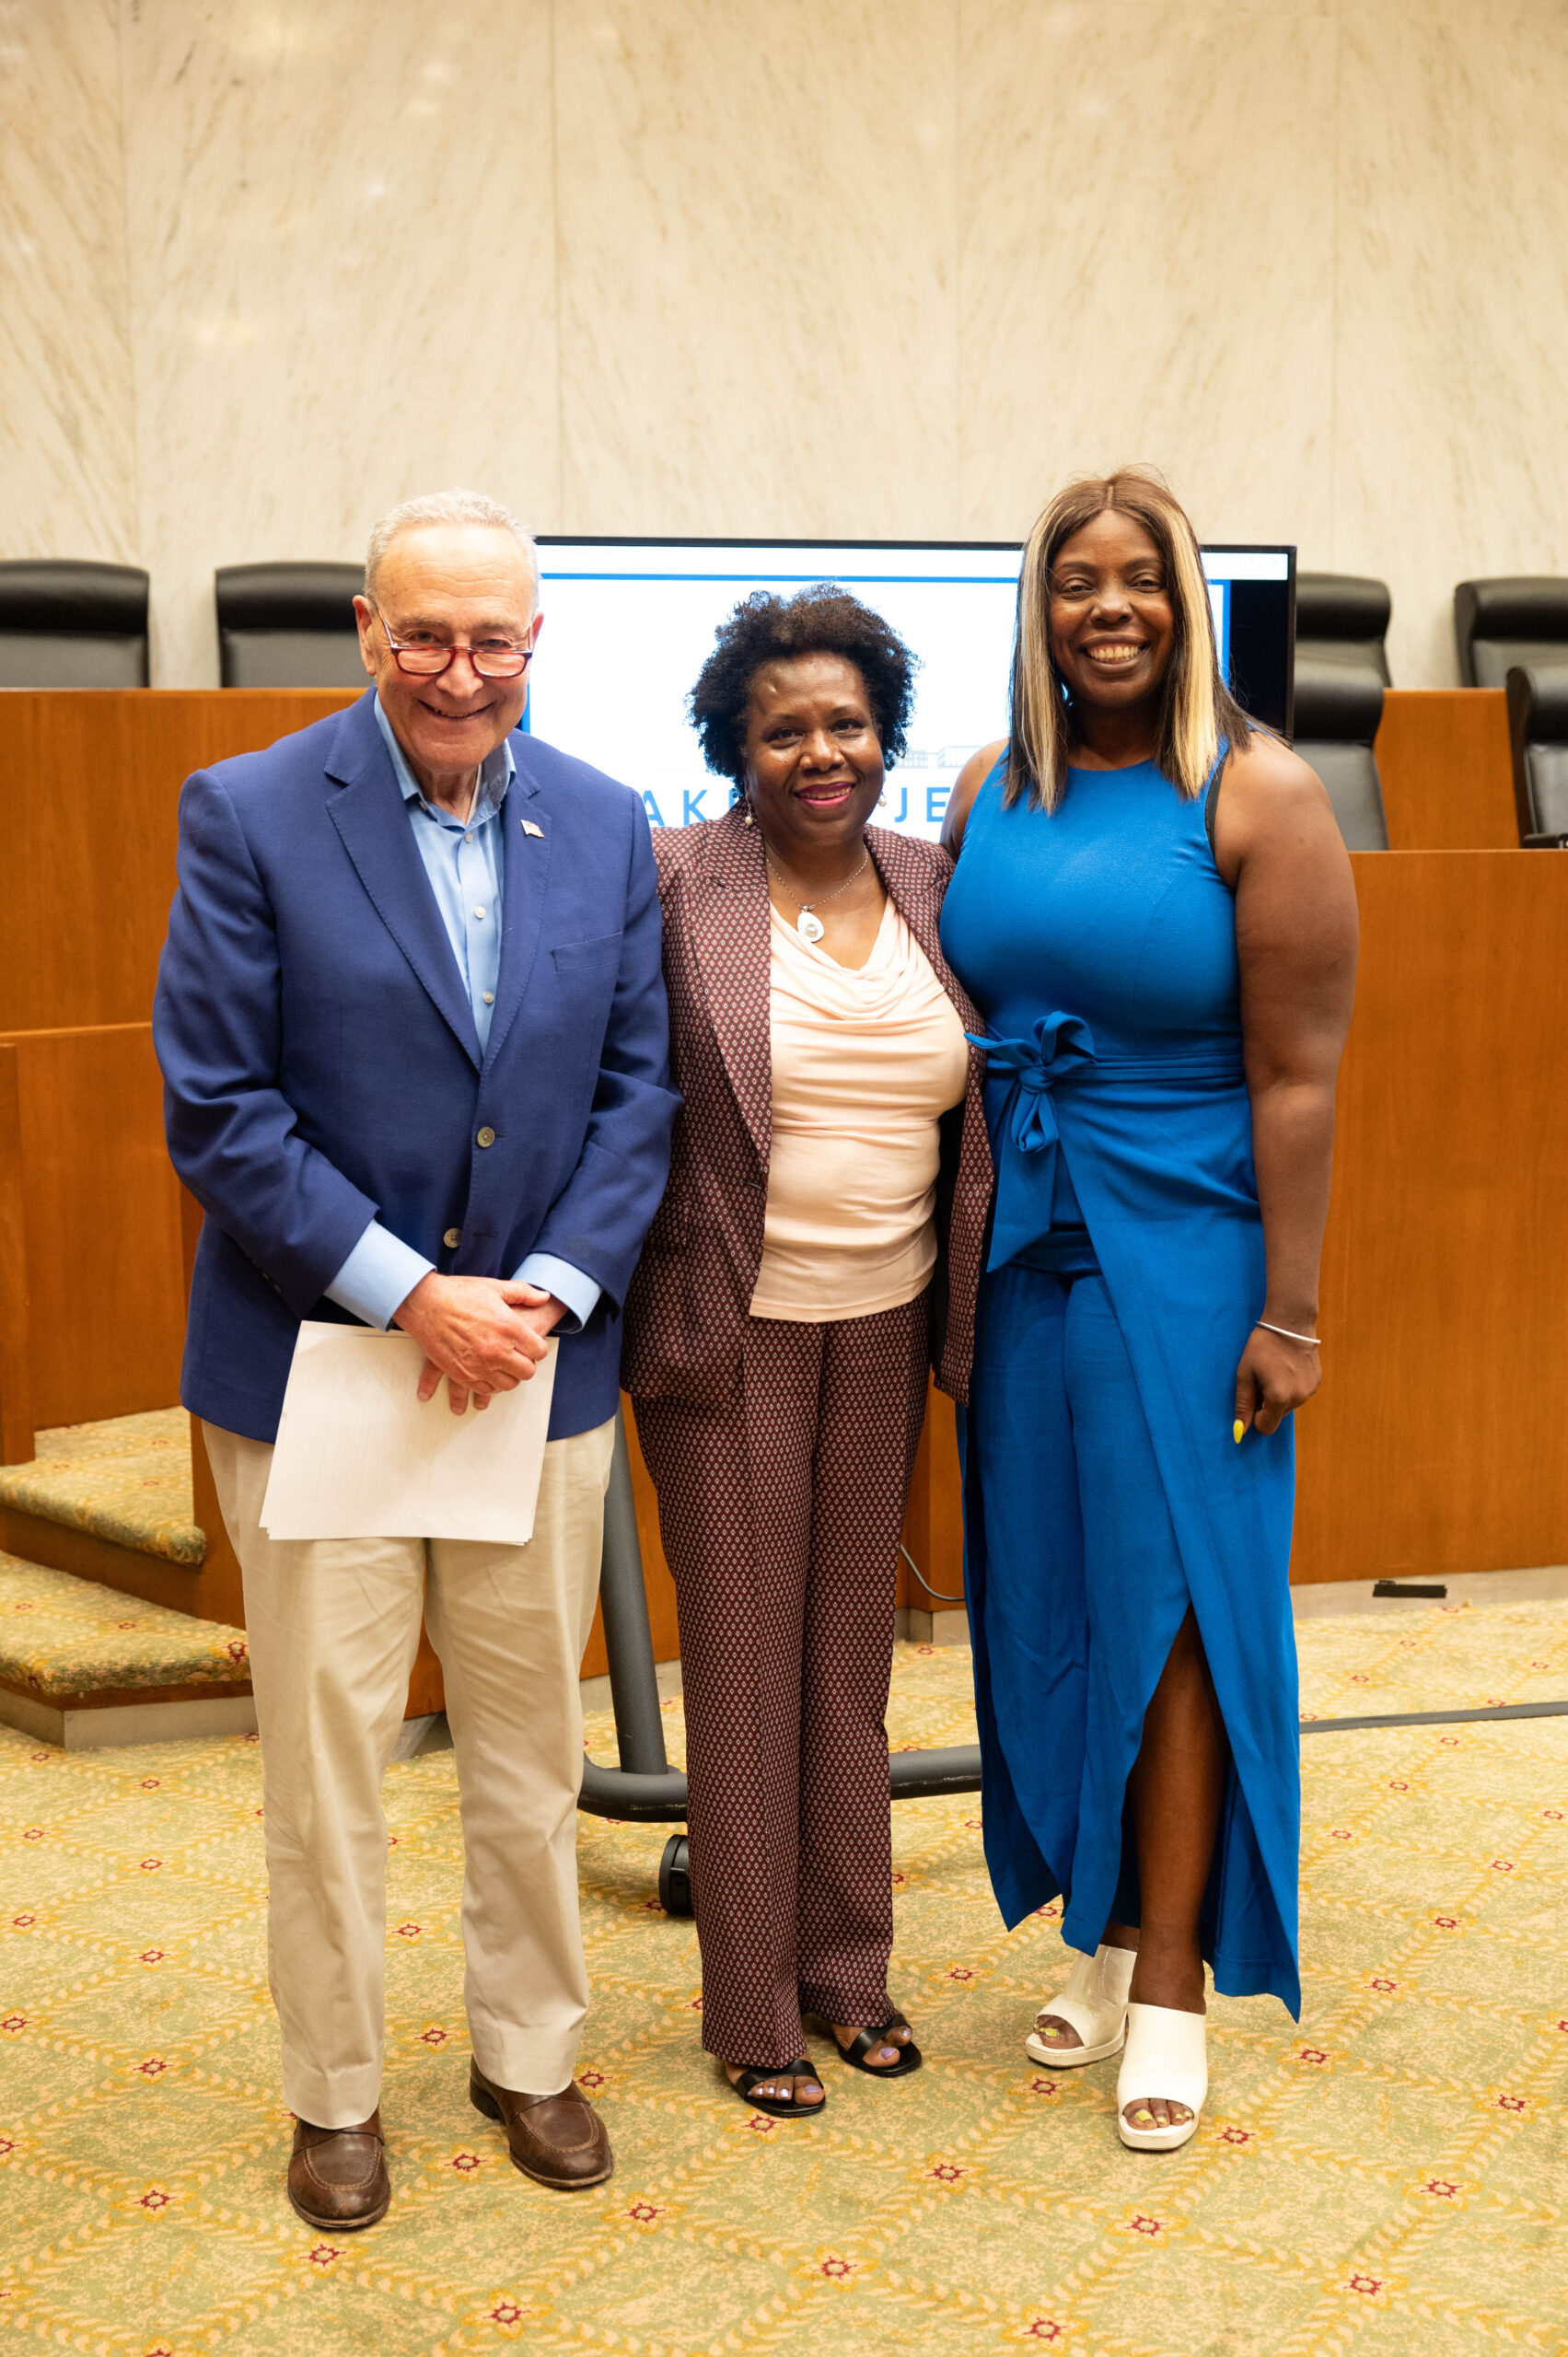 From left: Sen. Schumer, Justice Edwards and Assemblymember Latrice Walker. Photo by Jimmy Flix